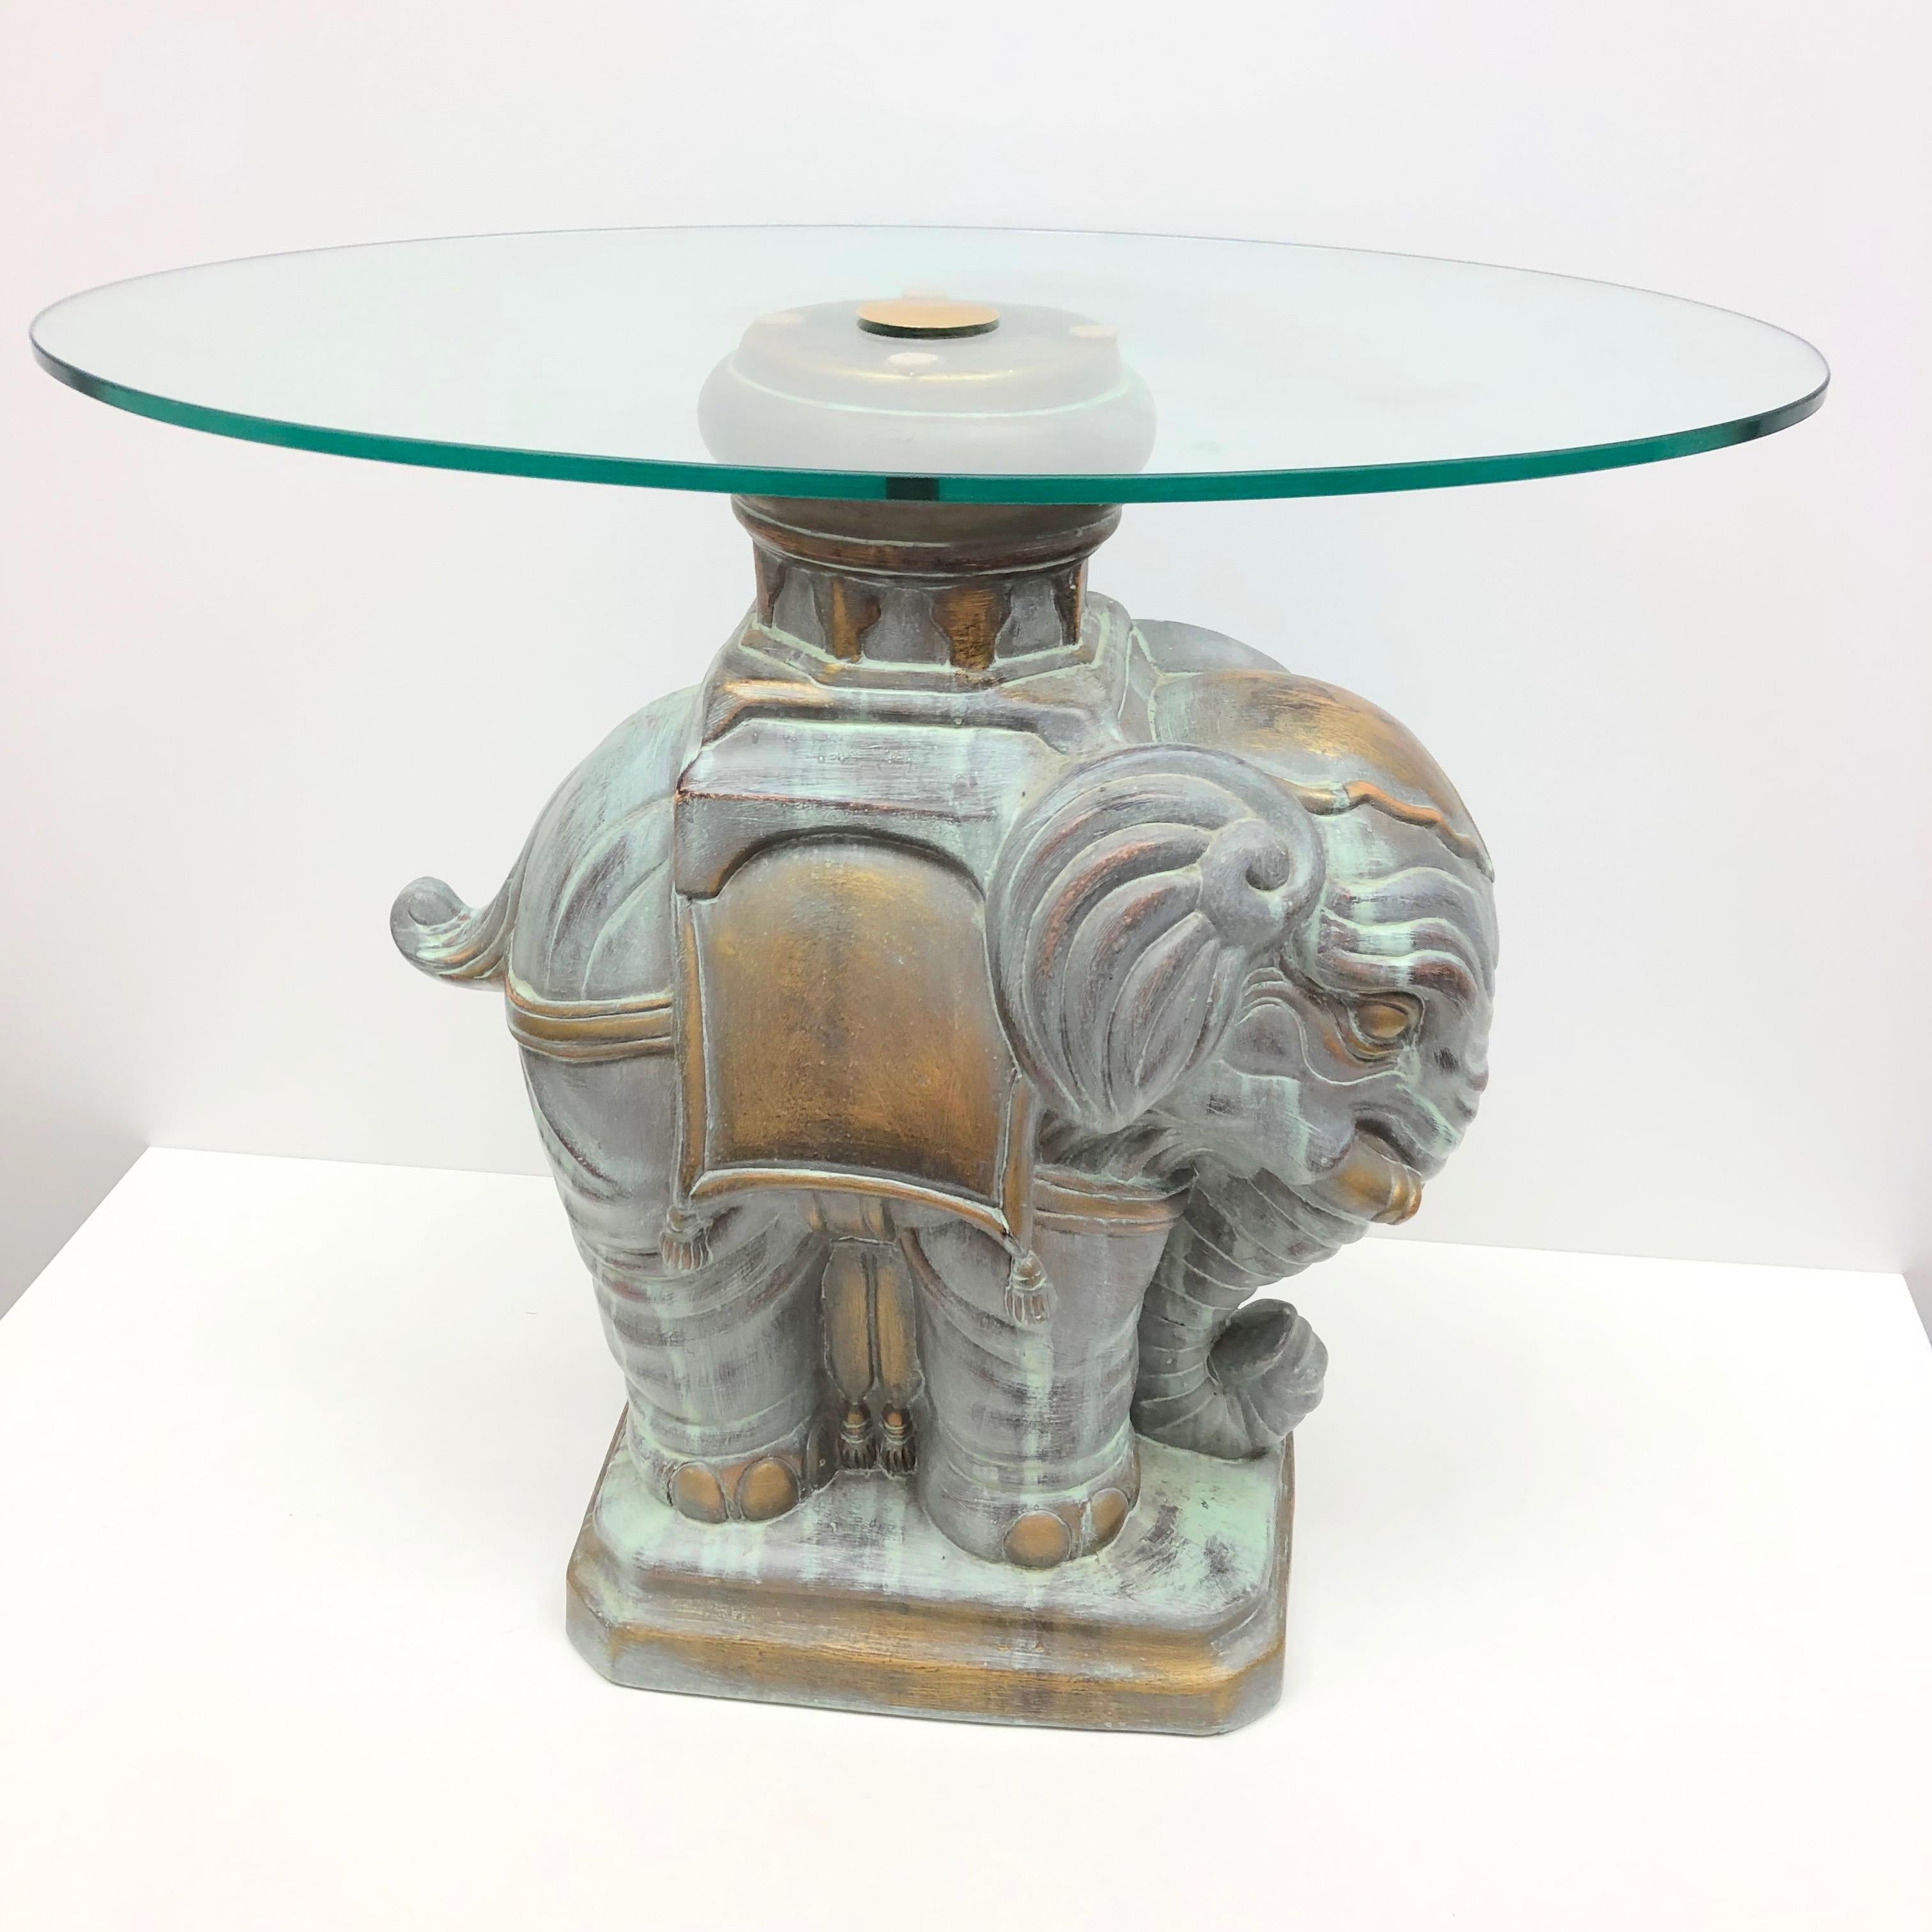 Mid-20th century earthenware elephant table with glass top. Handmade of earthenware. Nice addition to your home, patio or garden. A nice addition to any room, patio or yard.
 